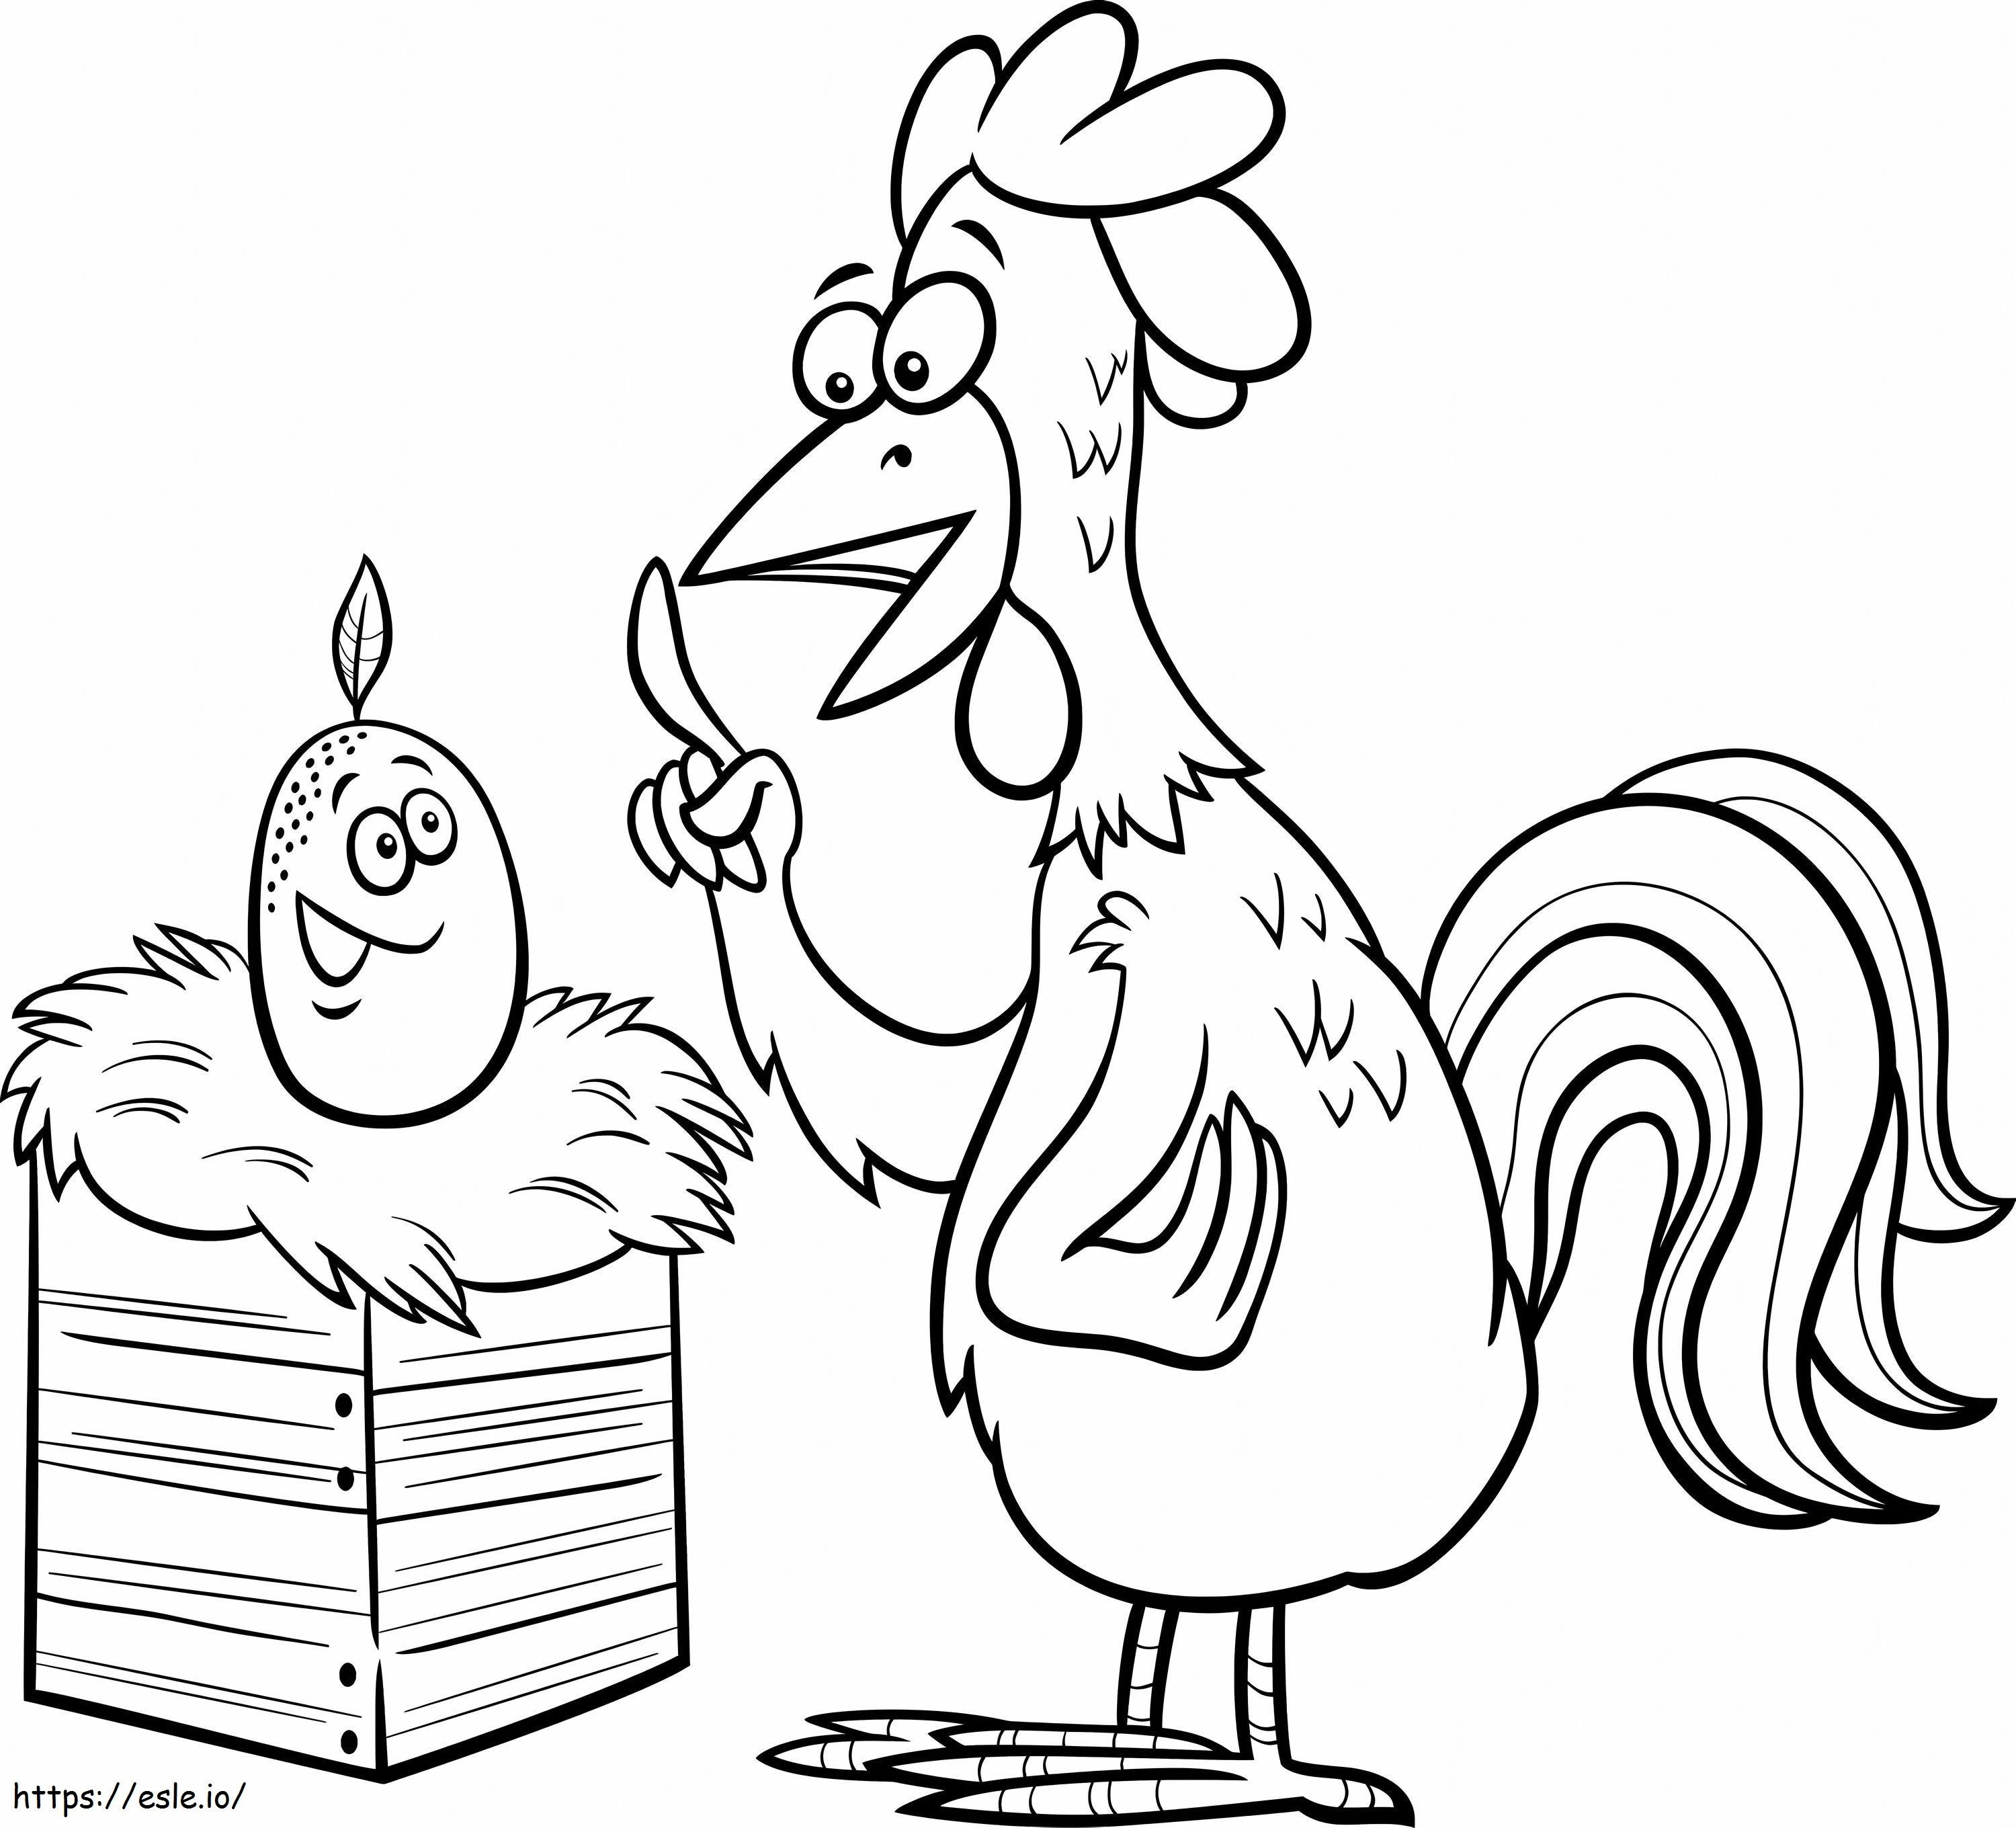 Cartoon Rooster And Egg coloring page